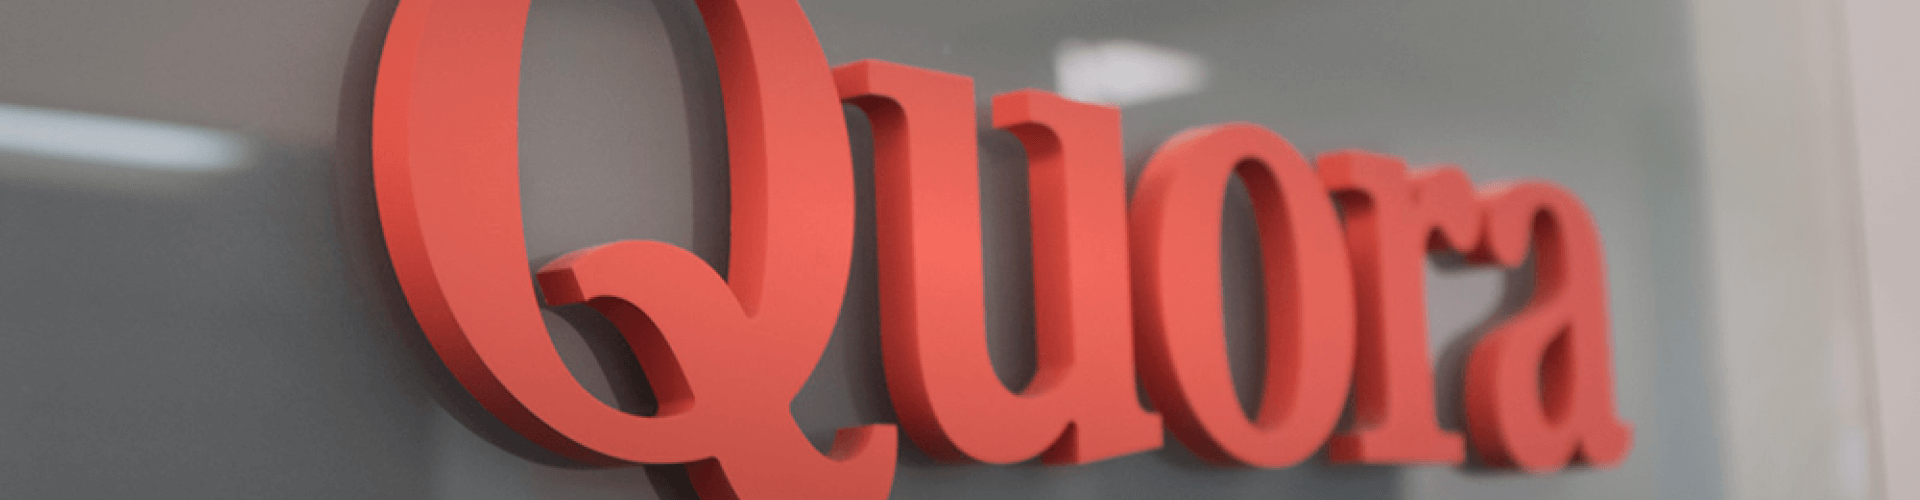 Tips to Boost Your Quora Presence